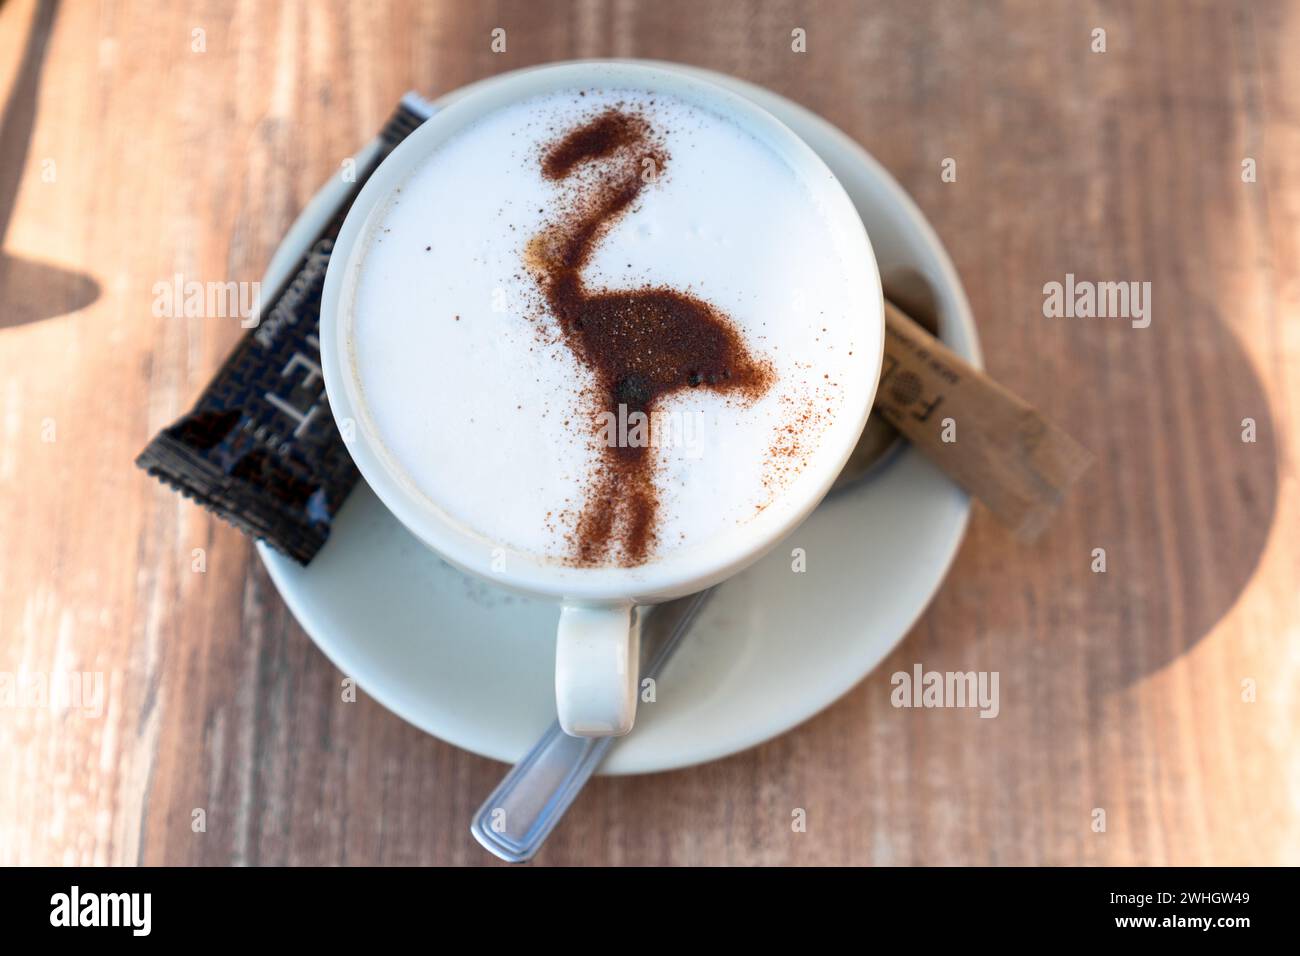 Close-up view of a delicious coffee with milk and a Camargue flamingo in chocolate powder Stock Photo